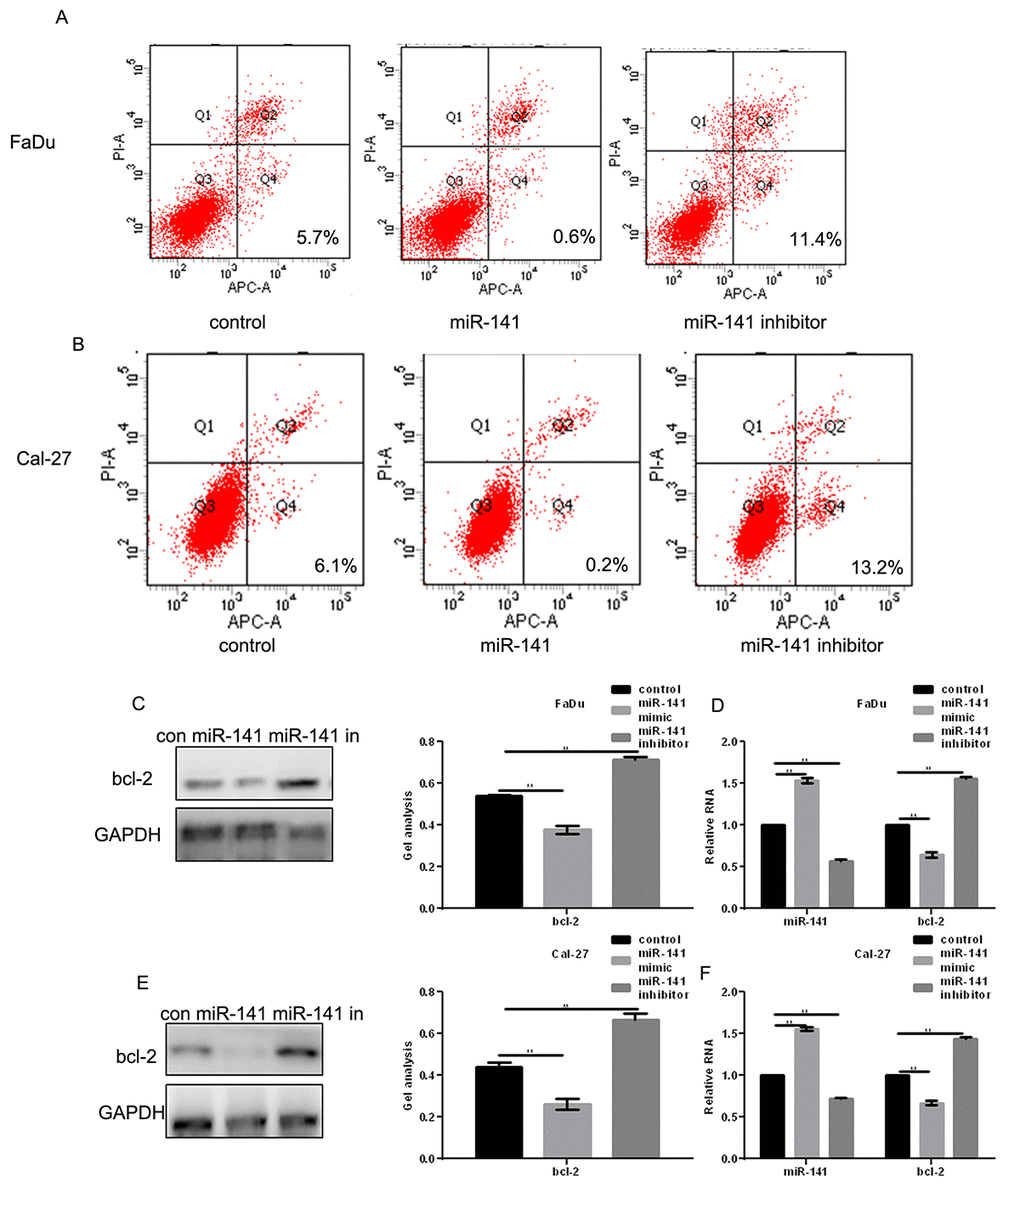 MiR-141 promotes HNSCC apoptosis. (A, B) Flow cytometry AV-PI assays showing the effect of miR-141 on FaDu and Cal-27 cell apoptosis. (C-F) Western blots and real-time PCR showing the effect of miR-141 mimic and inhibitor on bcl-2 expression in FaDu and Cal-27 cells. Bars depict the mean ± SD. ** P